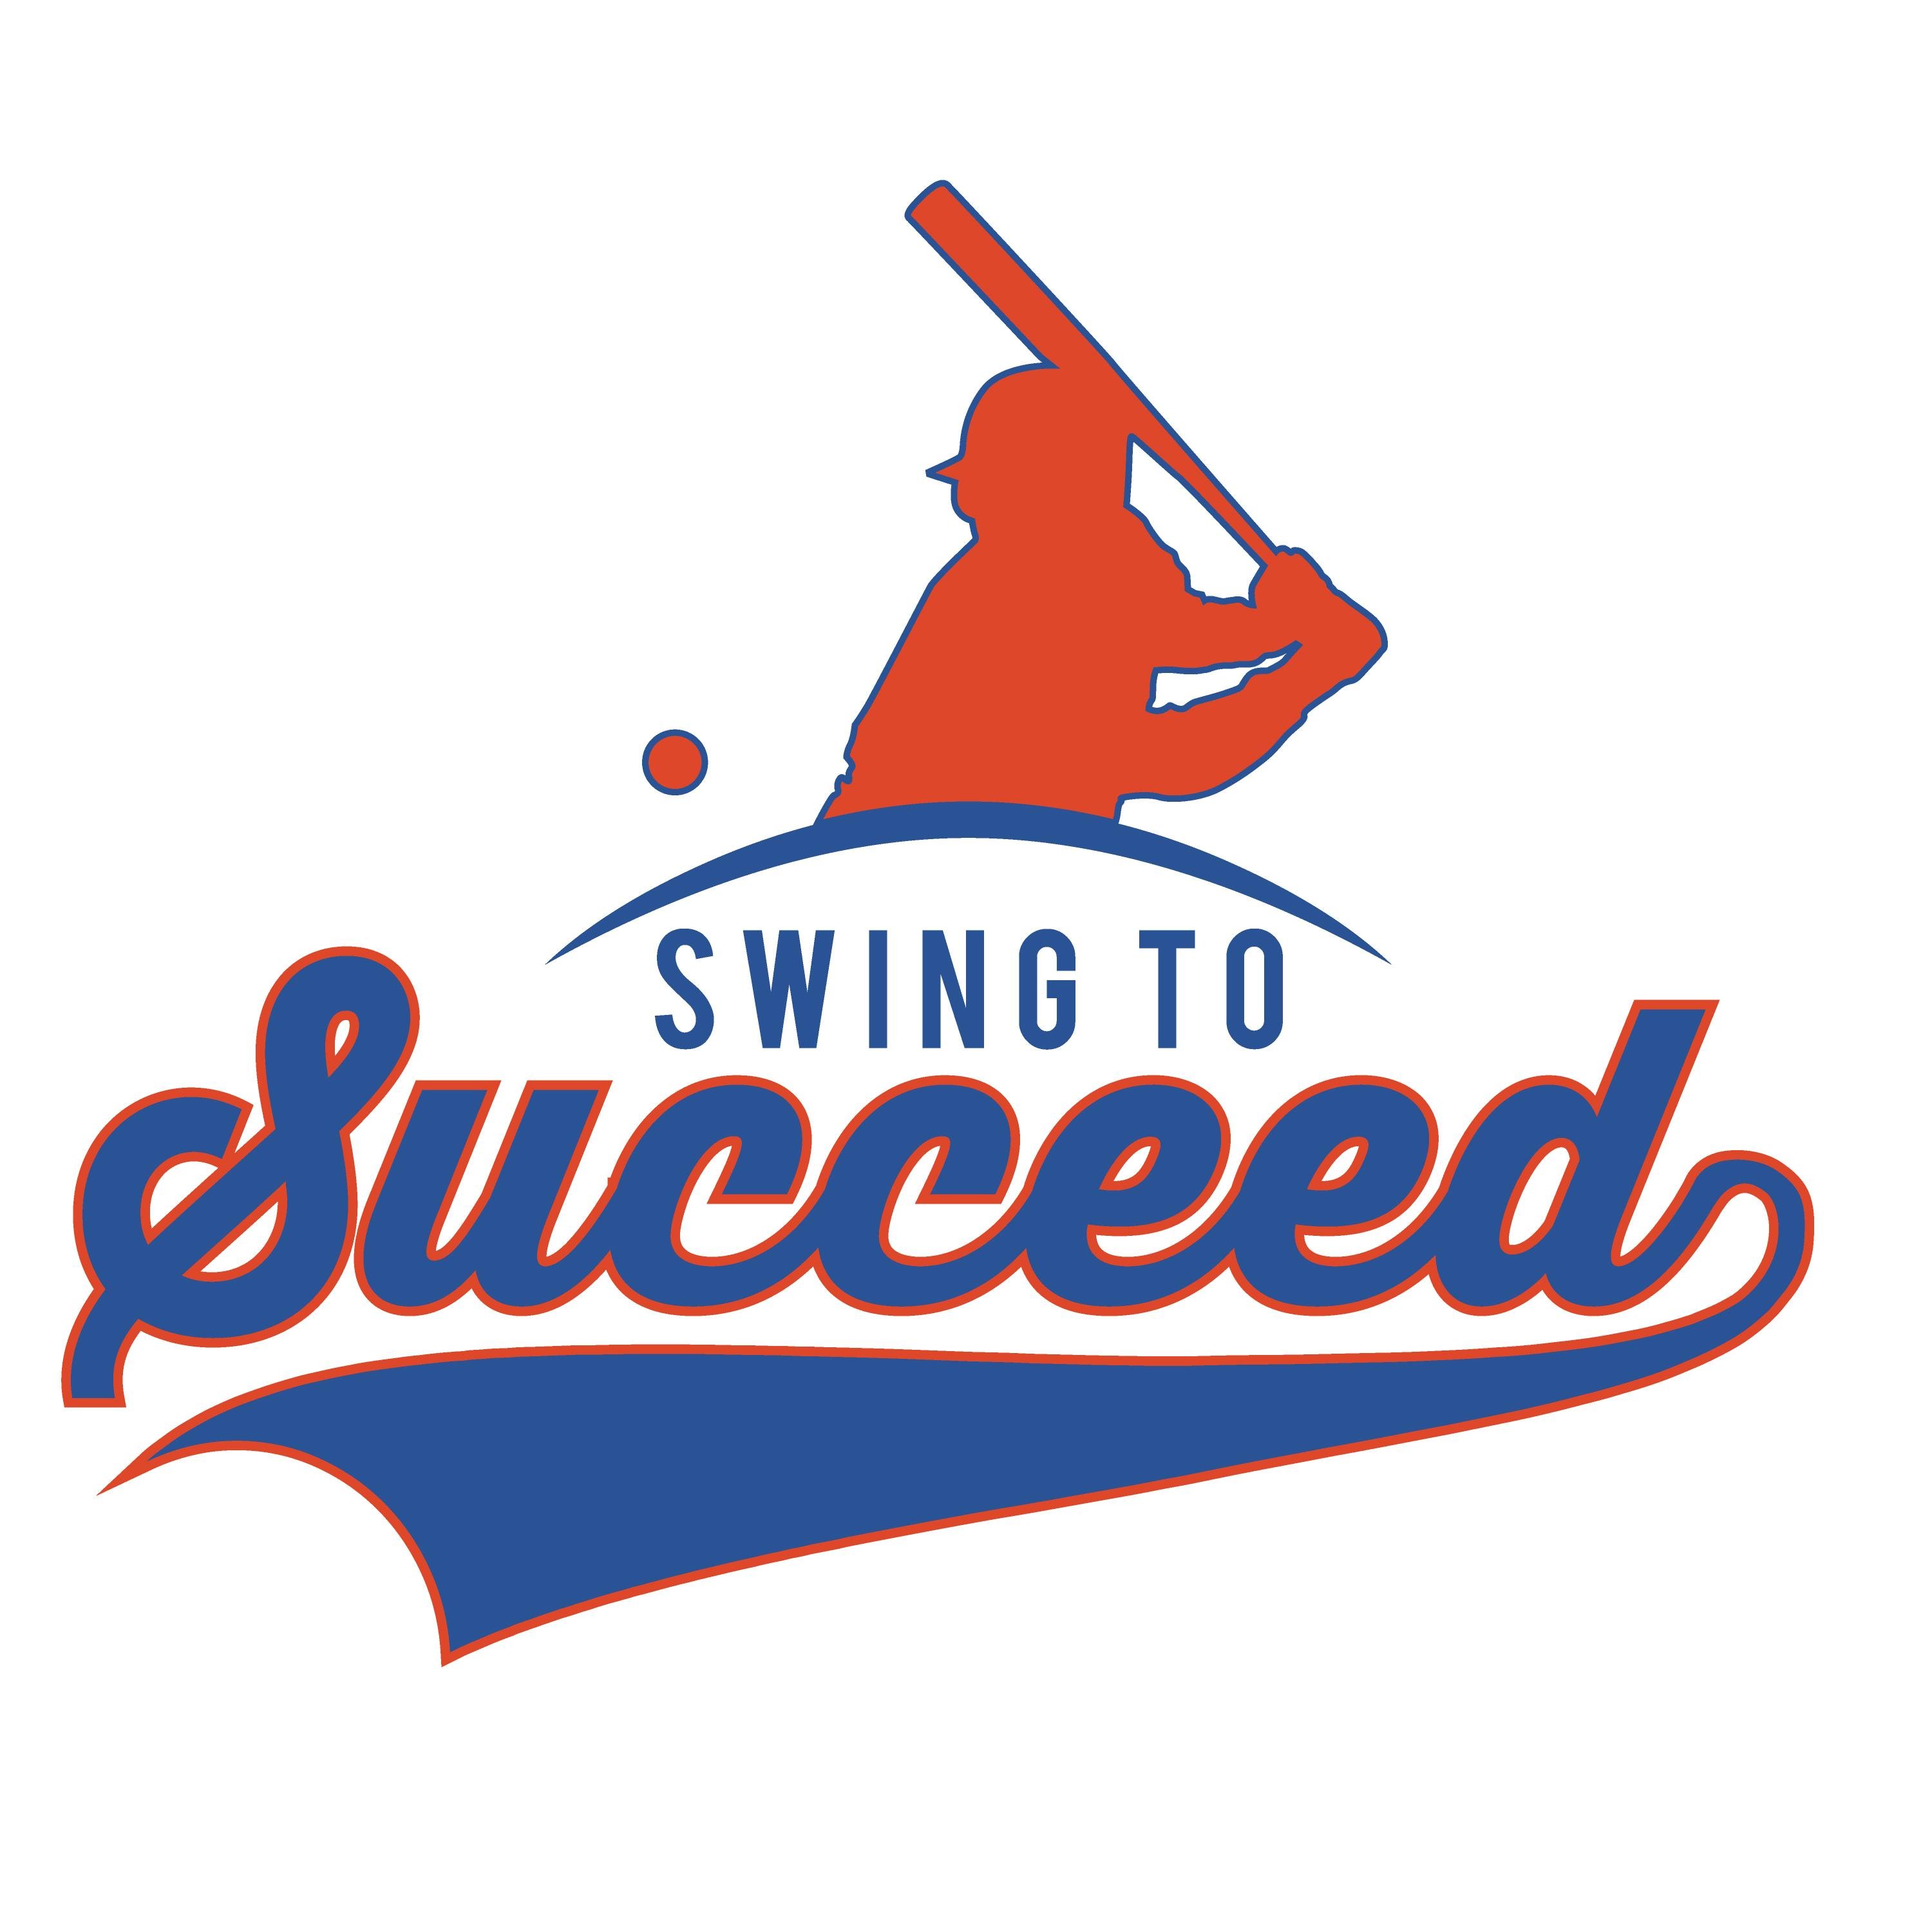 3rd Annual Swing To Succeed Baseball Camp. Wednesday, February 15, 2017. 6:00pm-8:30pm. Ages 6-12. Location: 2043 Silver Street, New Albany, IN 47150.